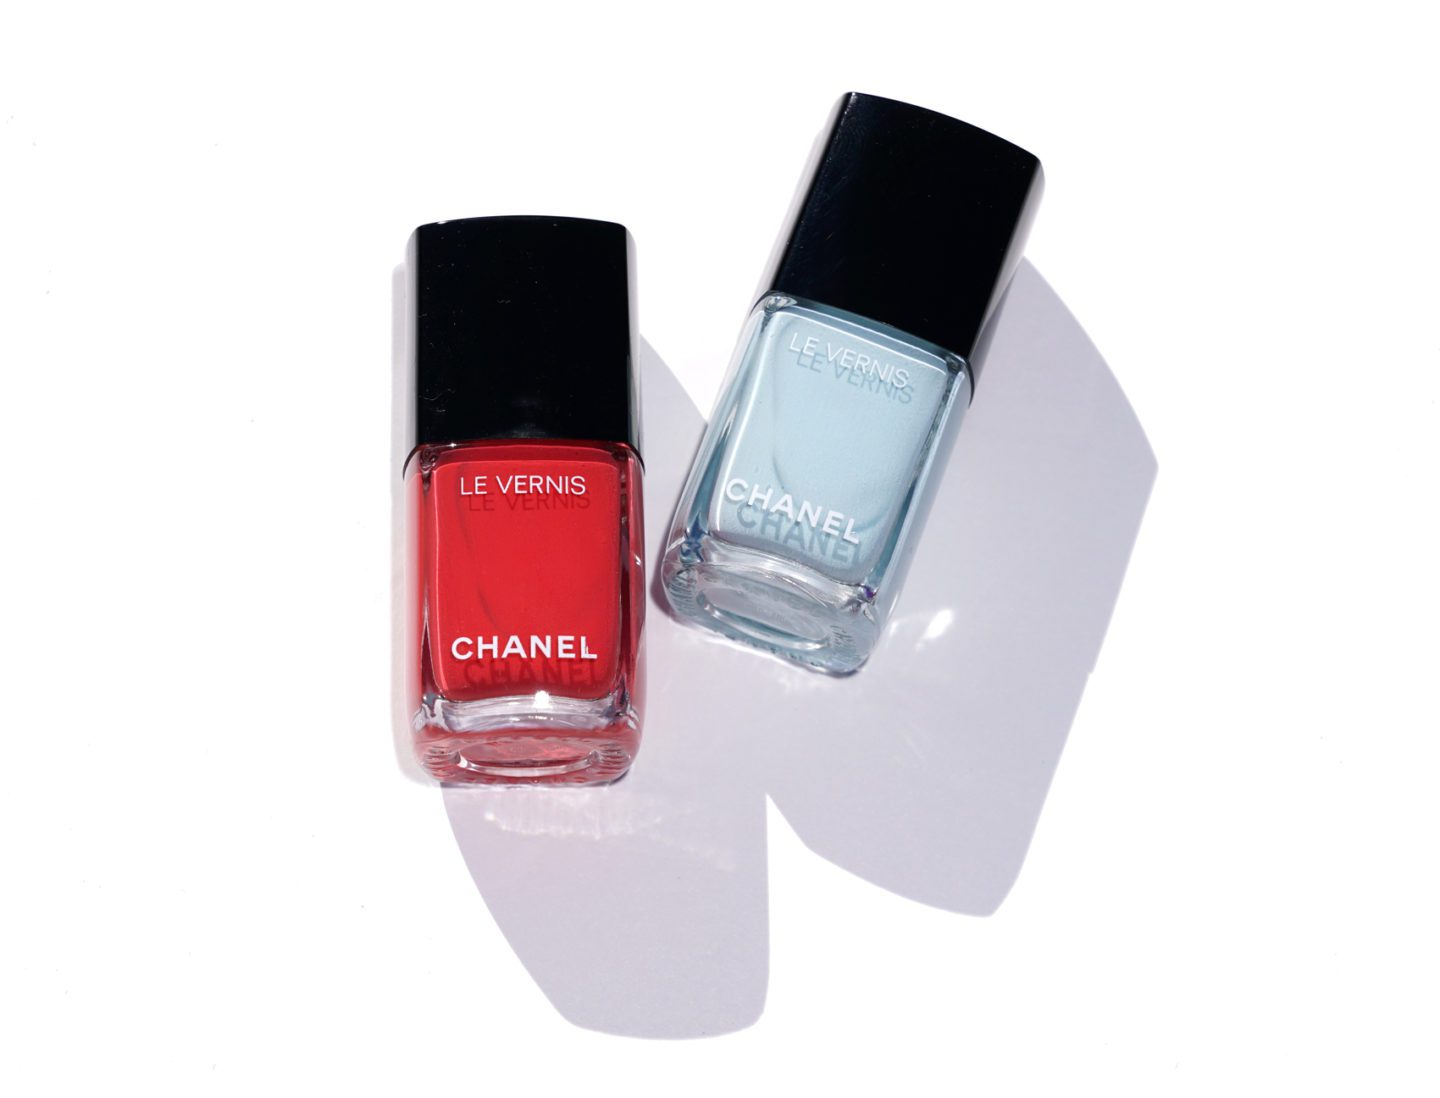 Chanel Le Vernis Resplendissant and Bleu Pastel | The Beauty Look Book